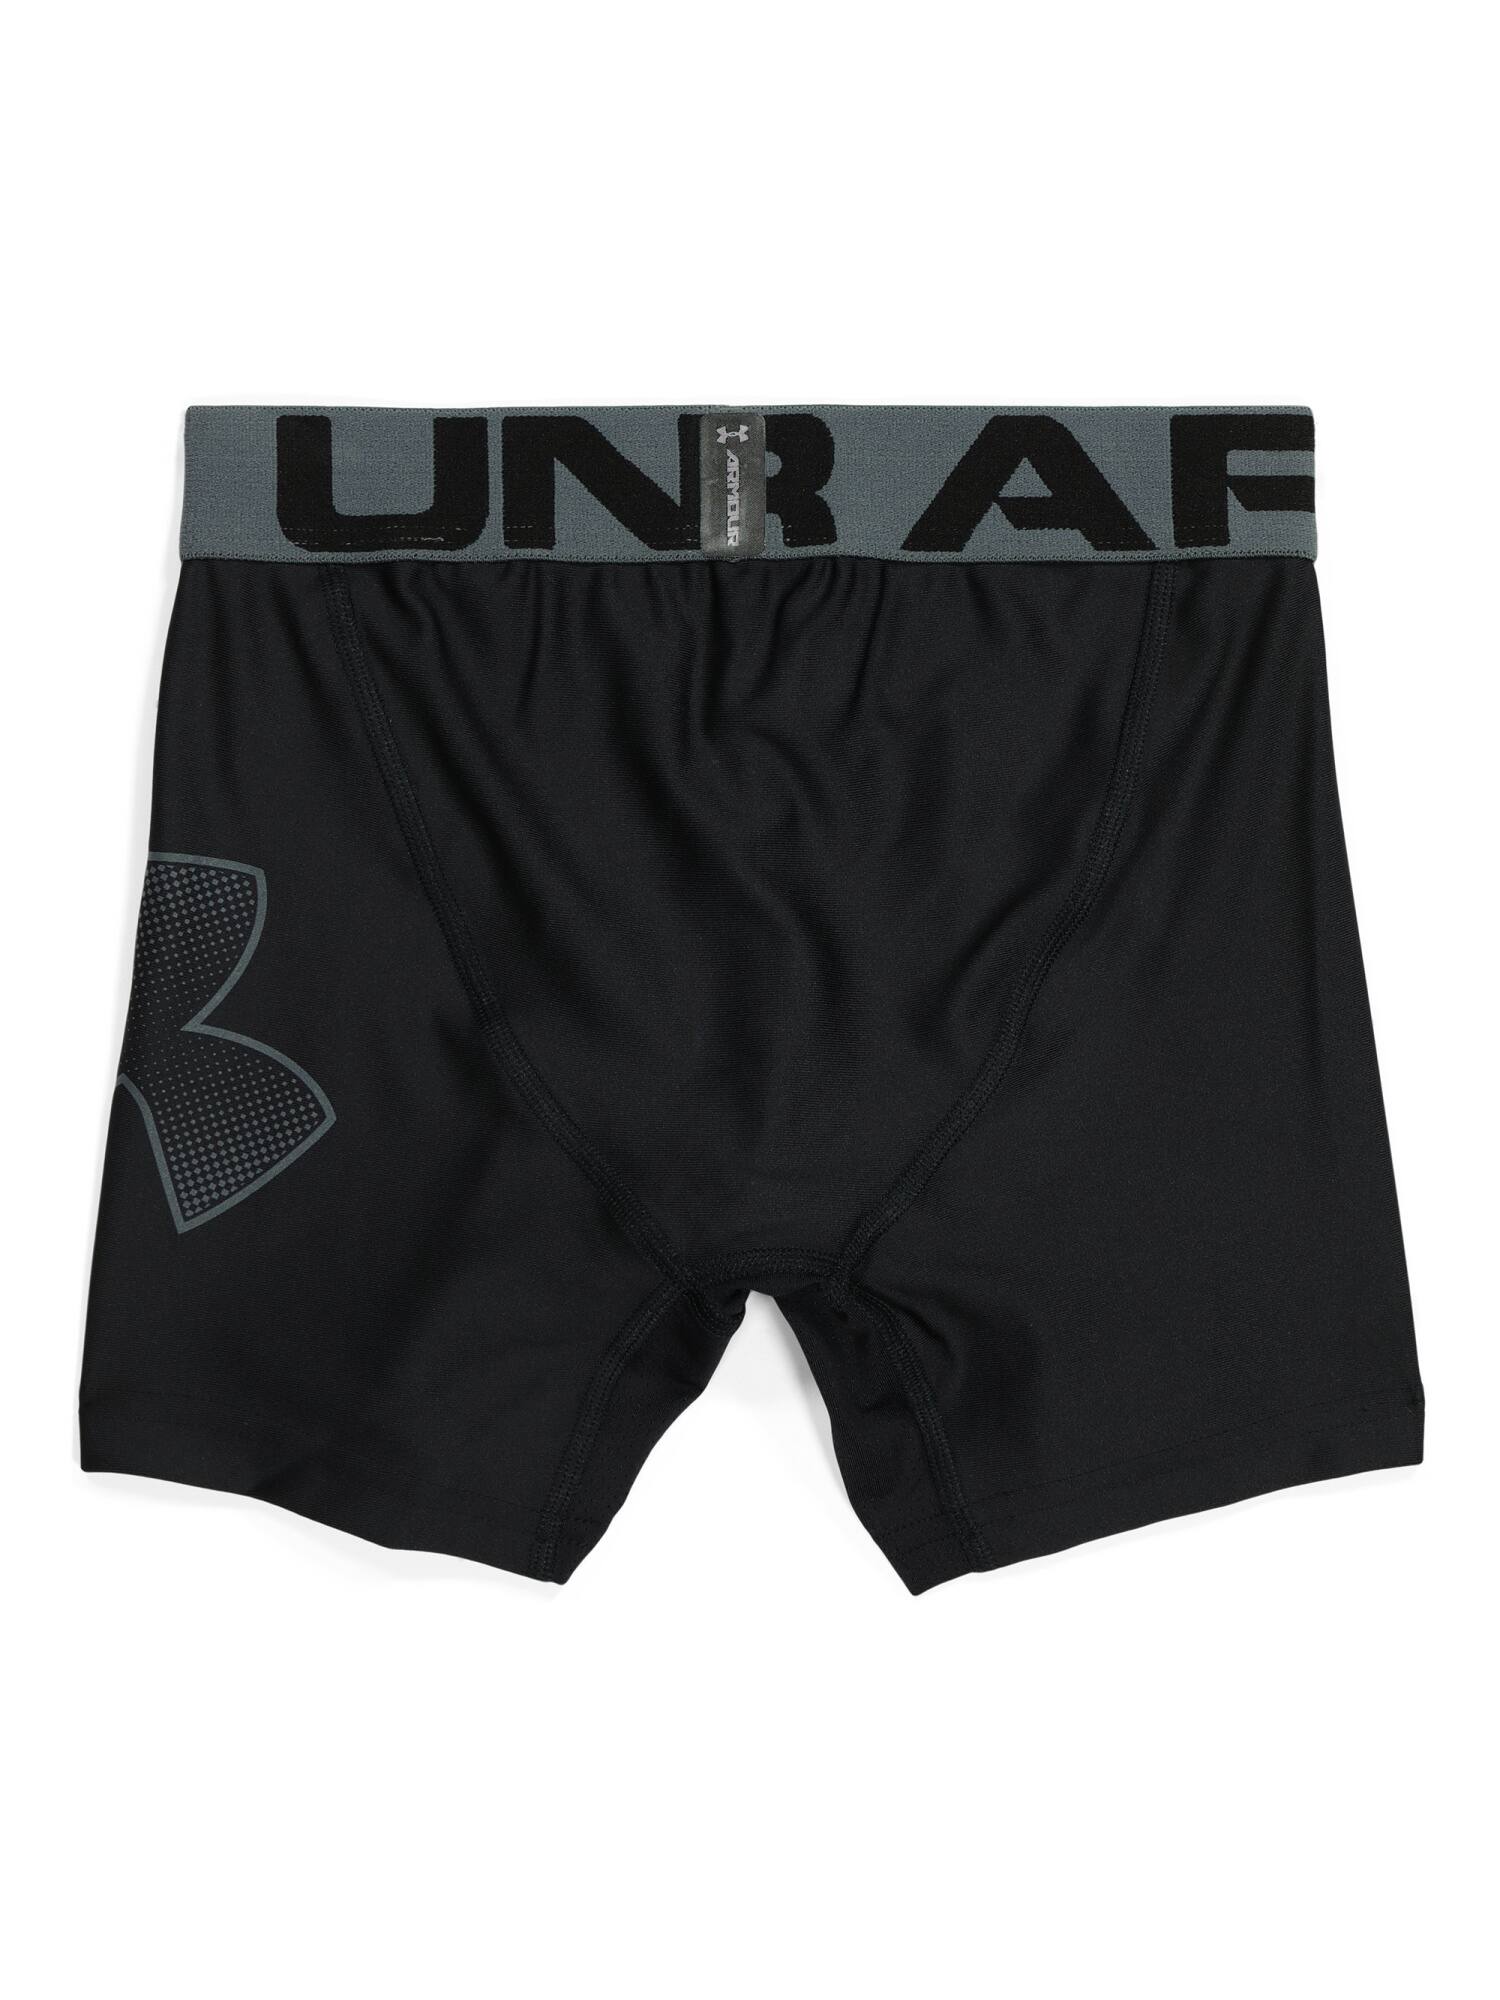 Under Armour Boys' HeatGear Fitted Shorts, Black (2 Styles) $7 at TJ Maxx + FS w/ email sign-up